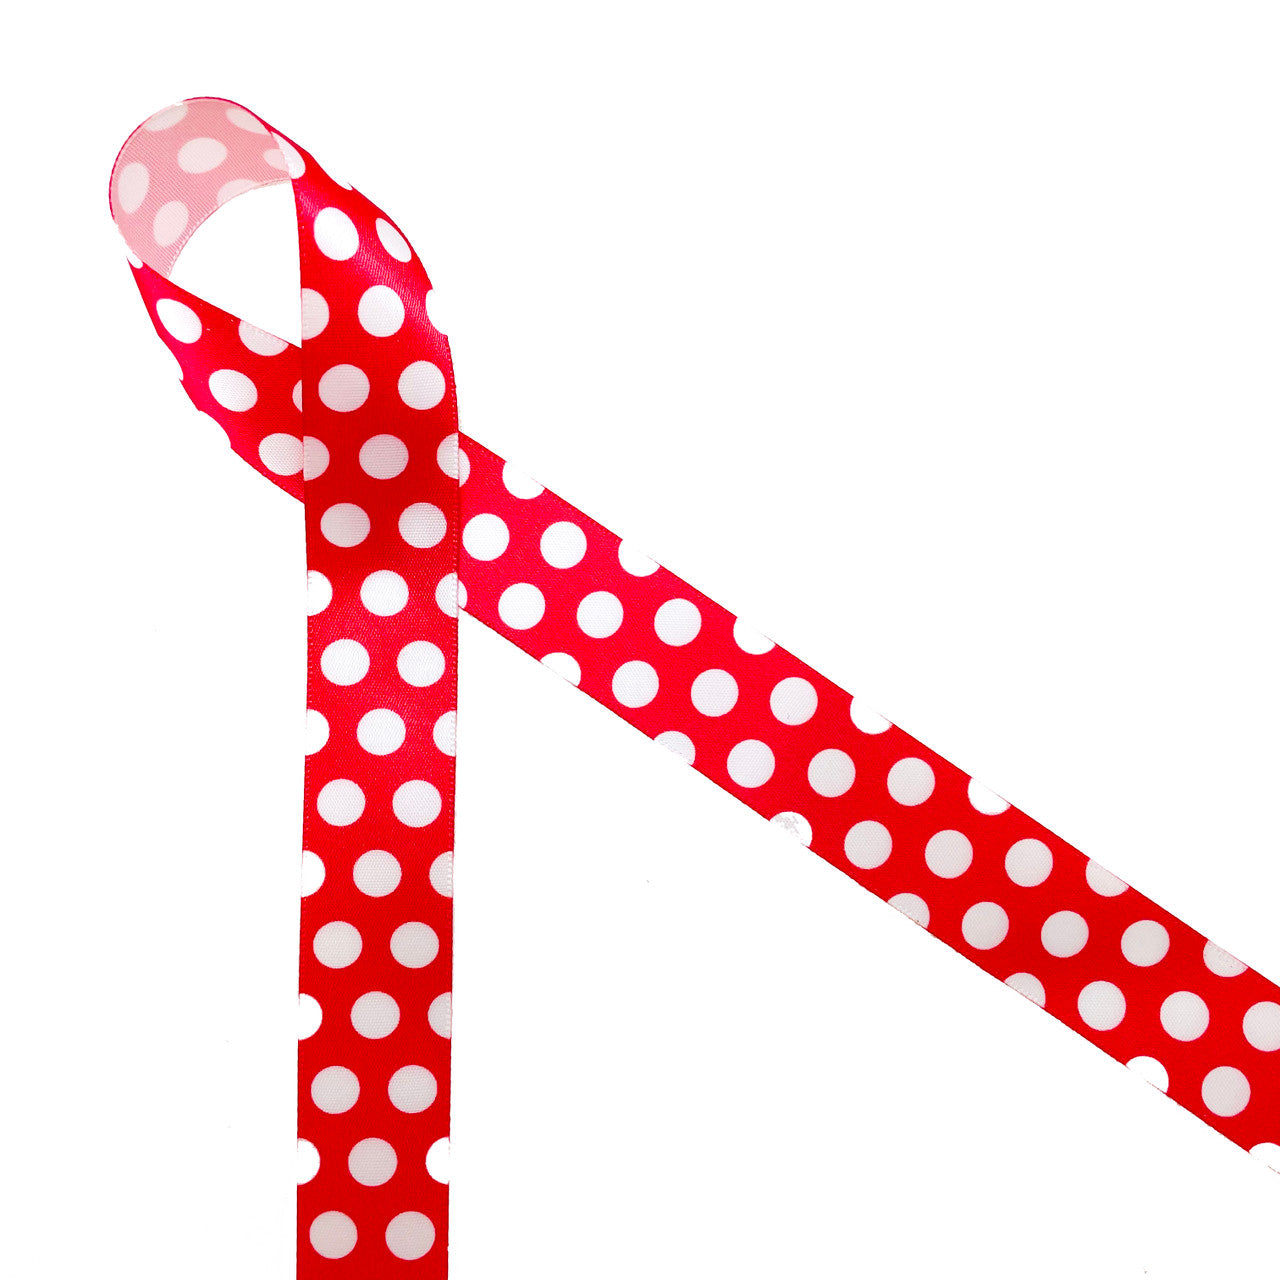 Polka dots ribbon in red and white printed on 7/8" white single face satin is a classic for so many occasions and applications. This is a great ribbon for Valentine's Day, Christmas and Birthday celebrations. Use this ribbon for hair bows, head bands, gift wrap, gift baskets, party decor, candy shops, cookies and cake pops. This classic design is perfect for quilting, sewing and crafting projects too!